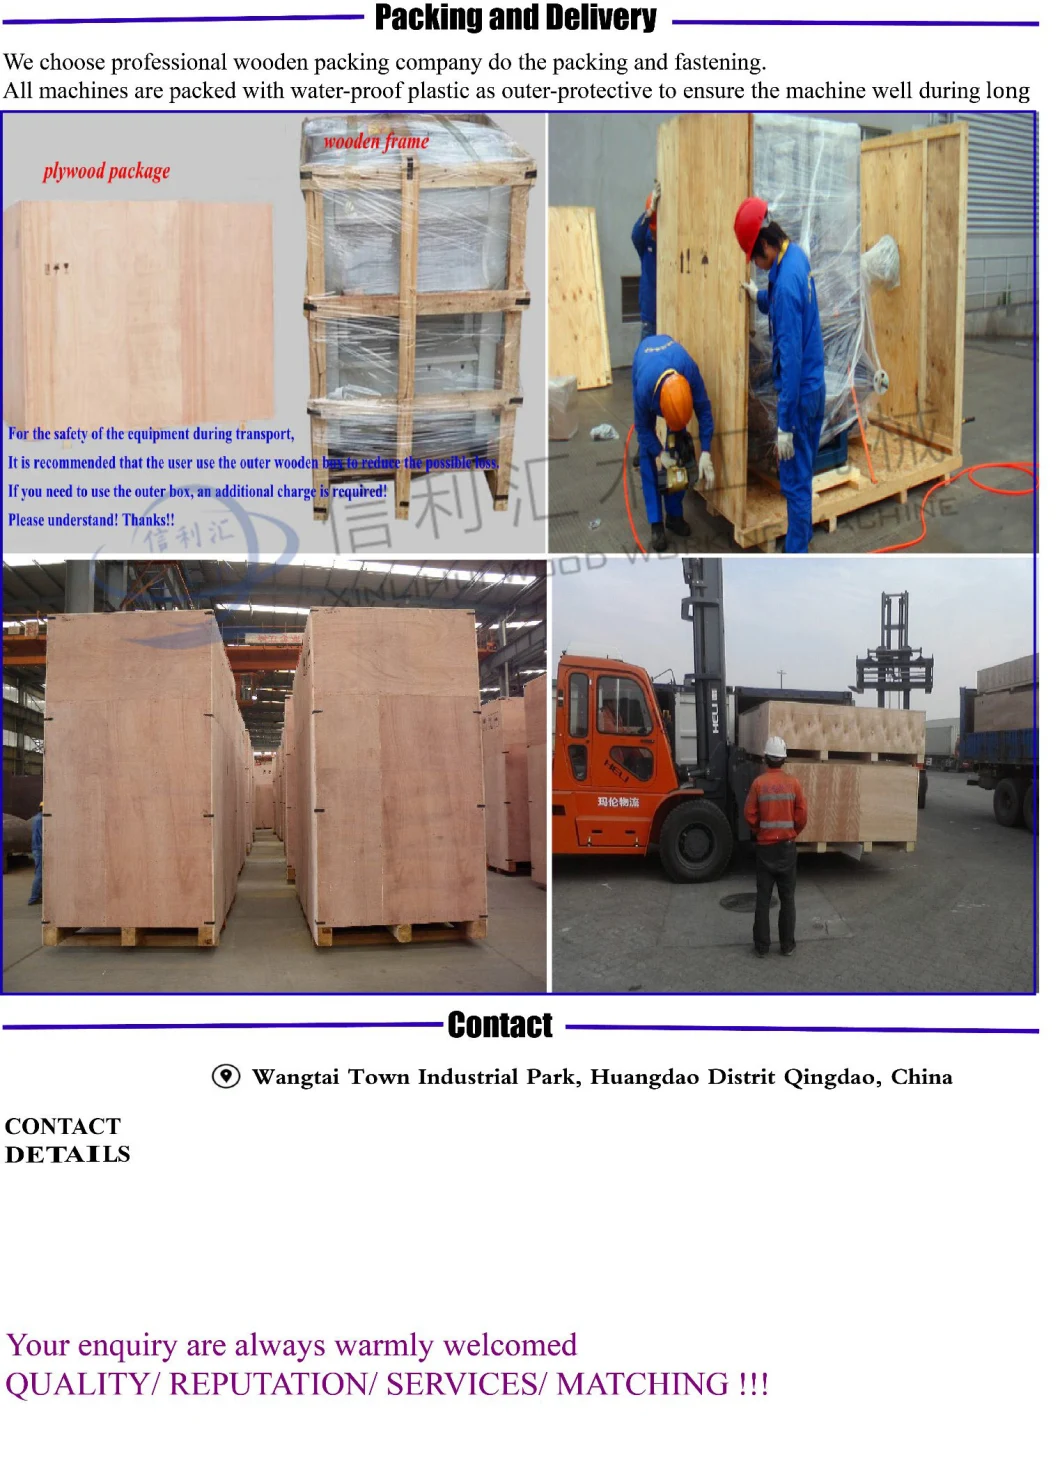 Wood Industrial Baghouse Filter Central Dust Collector for Power or Cement Plant Industrial Cyclone Separator Dust Collector for Woodworking Machine